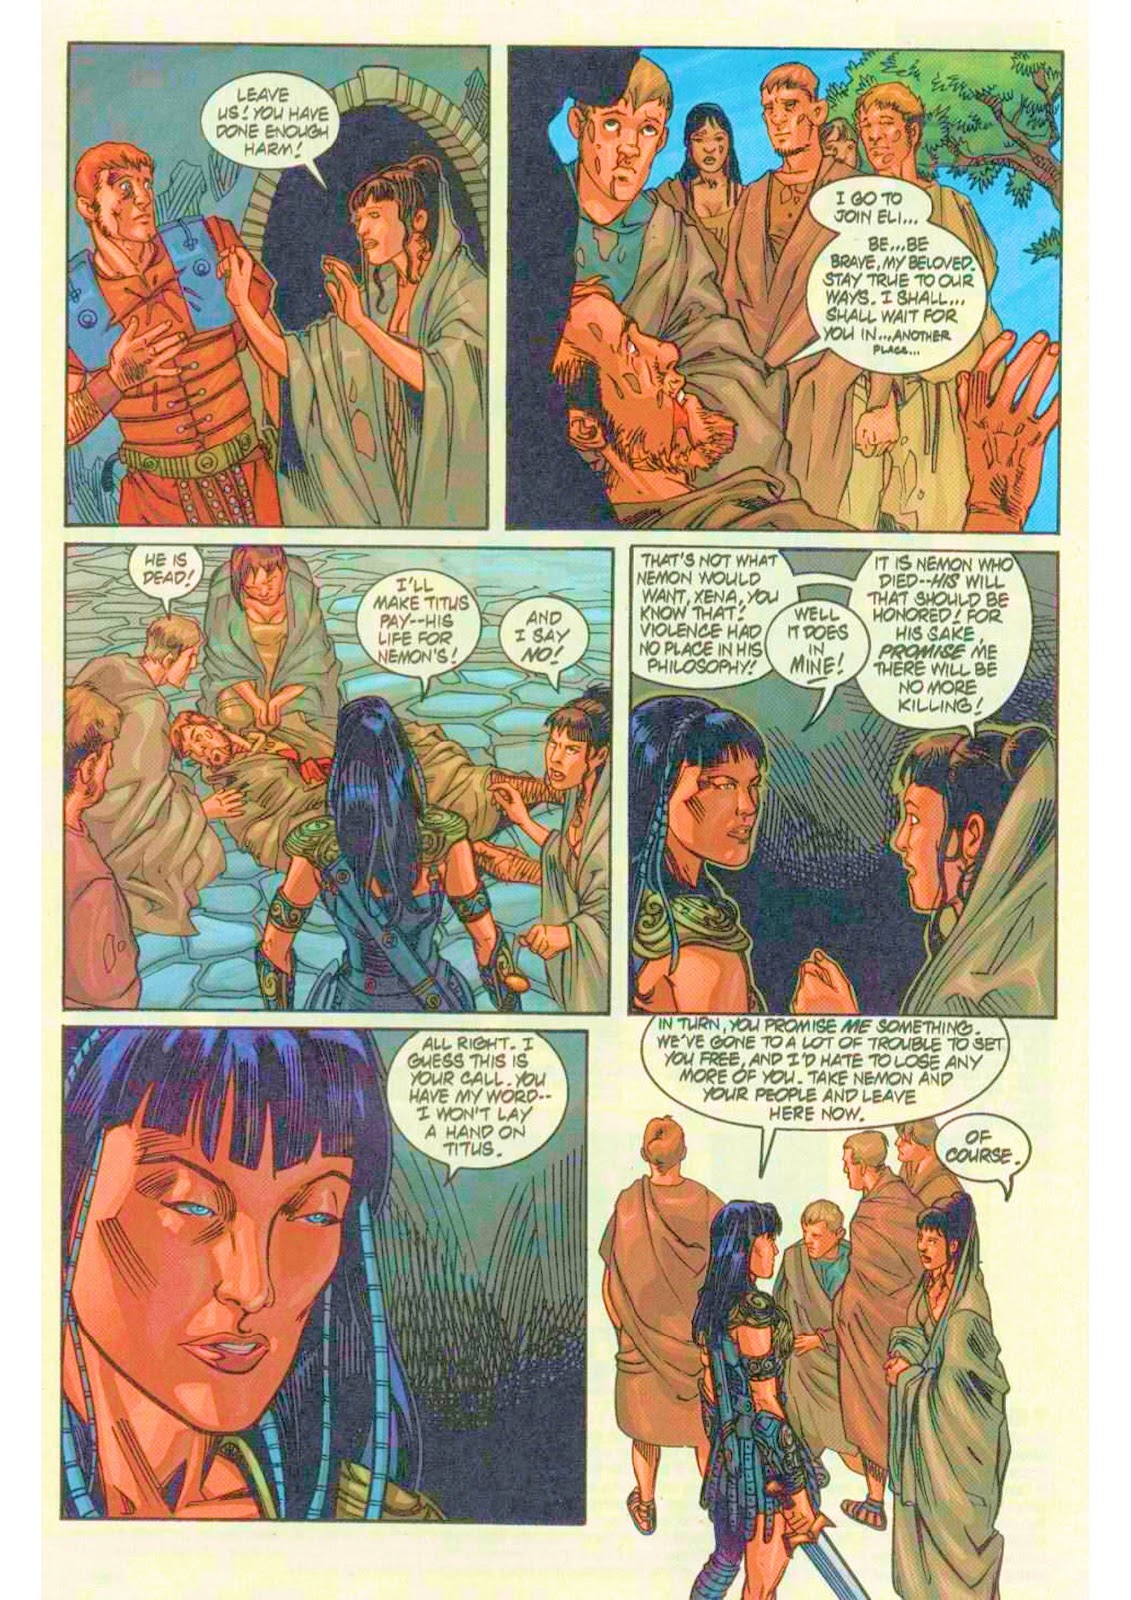 Xena: Warrior Princess (1999) issue 8 - Page 16